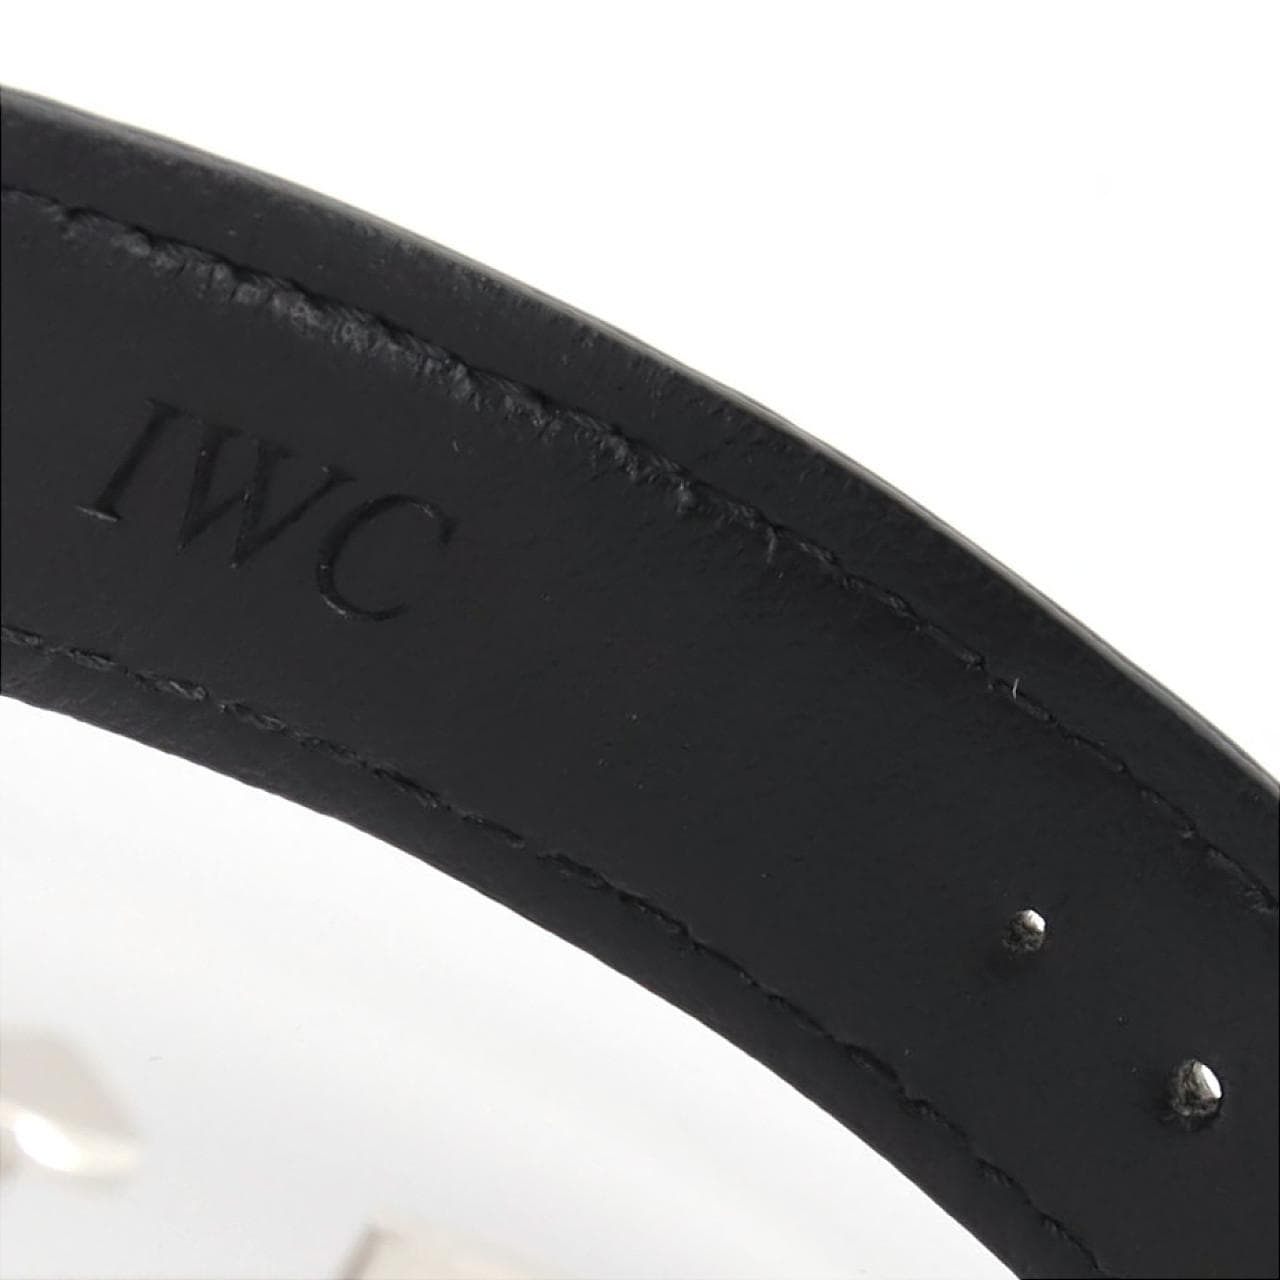 IWC Portugieser Automatic 40 IW358305 SS Automatic